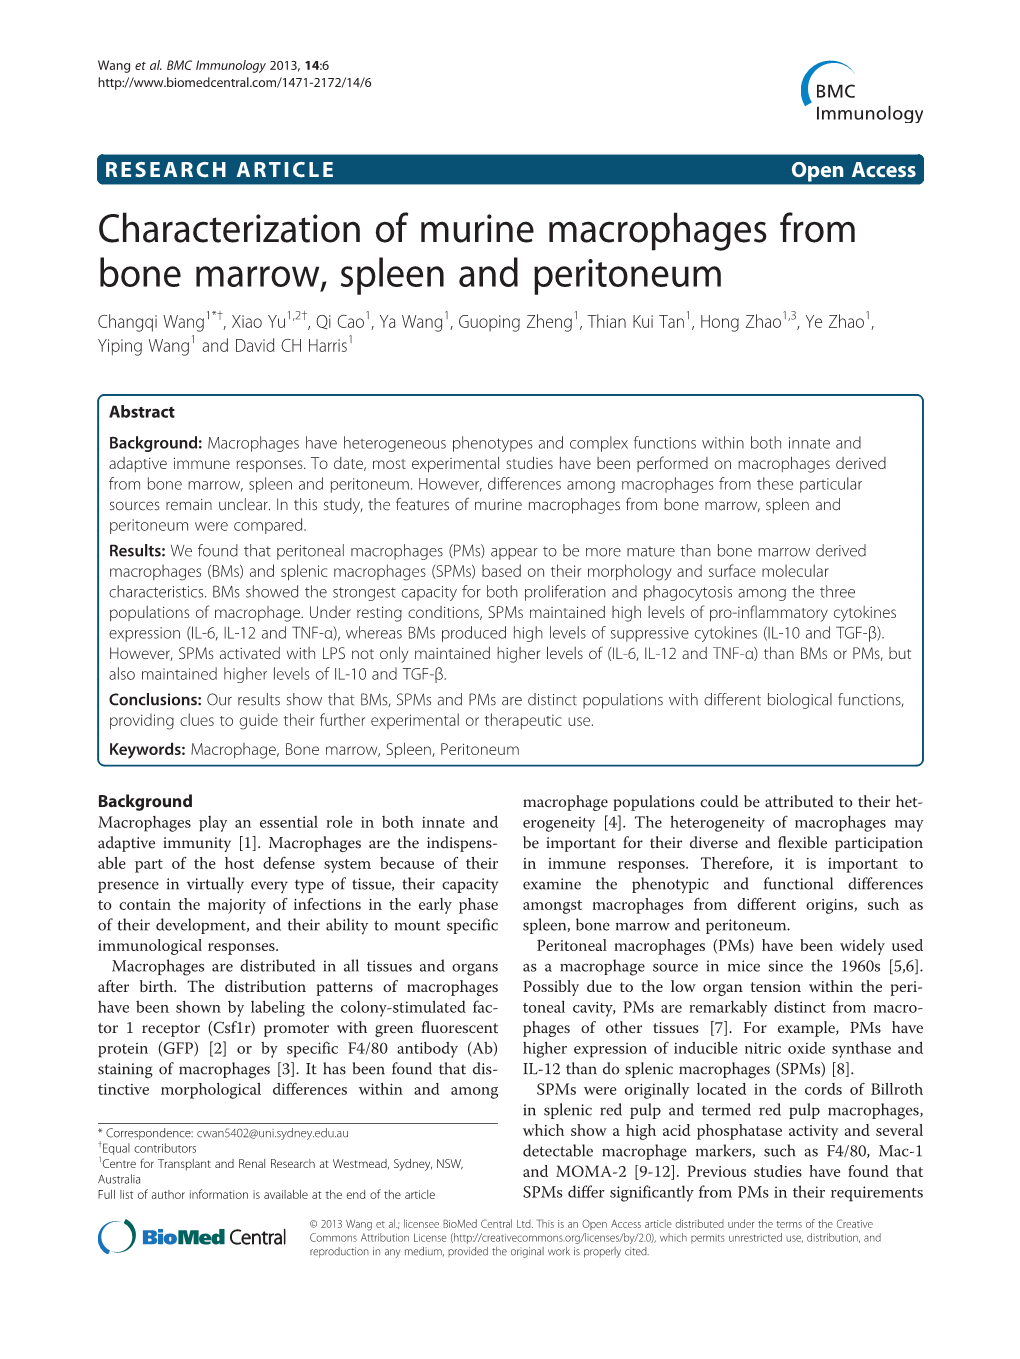 Characterization of Murine Macrophages from Bone Marrow